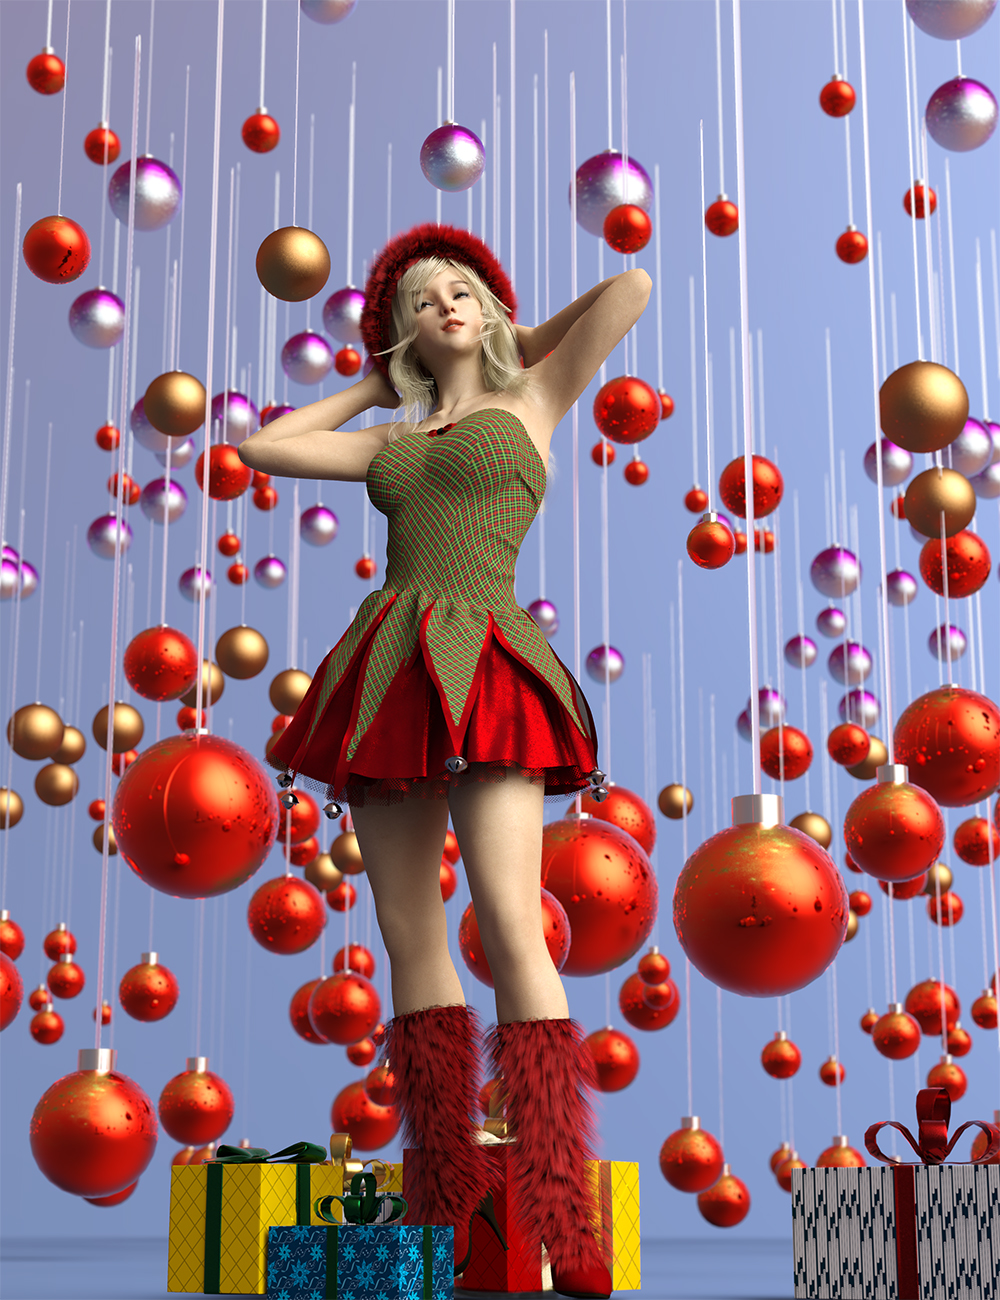 Festive Balls - Low Res Decorations and Shaders by: MartinJFrost, 3D Models by Daz 3D